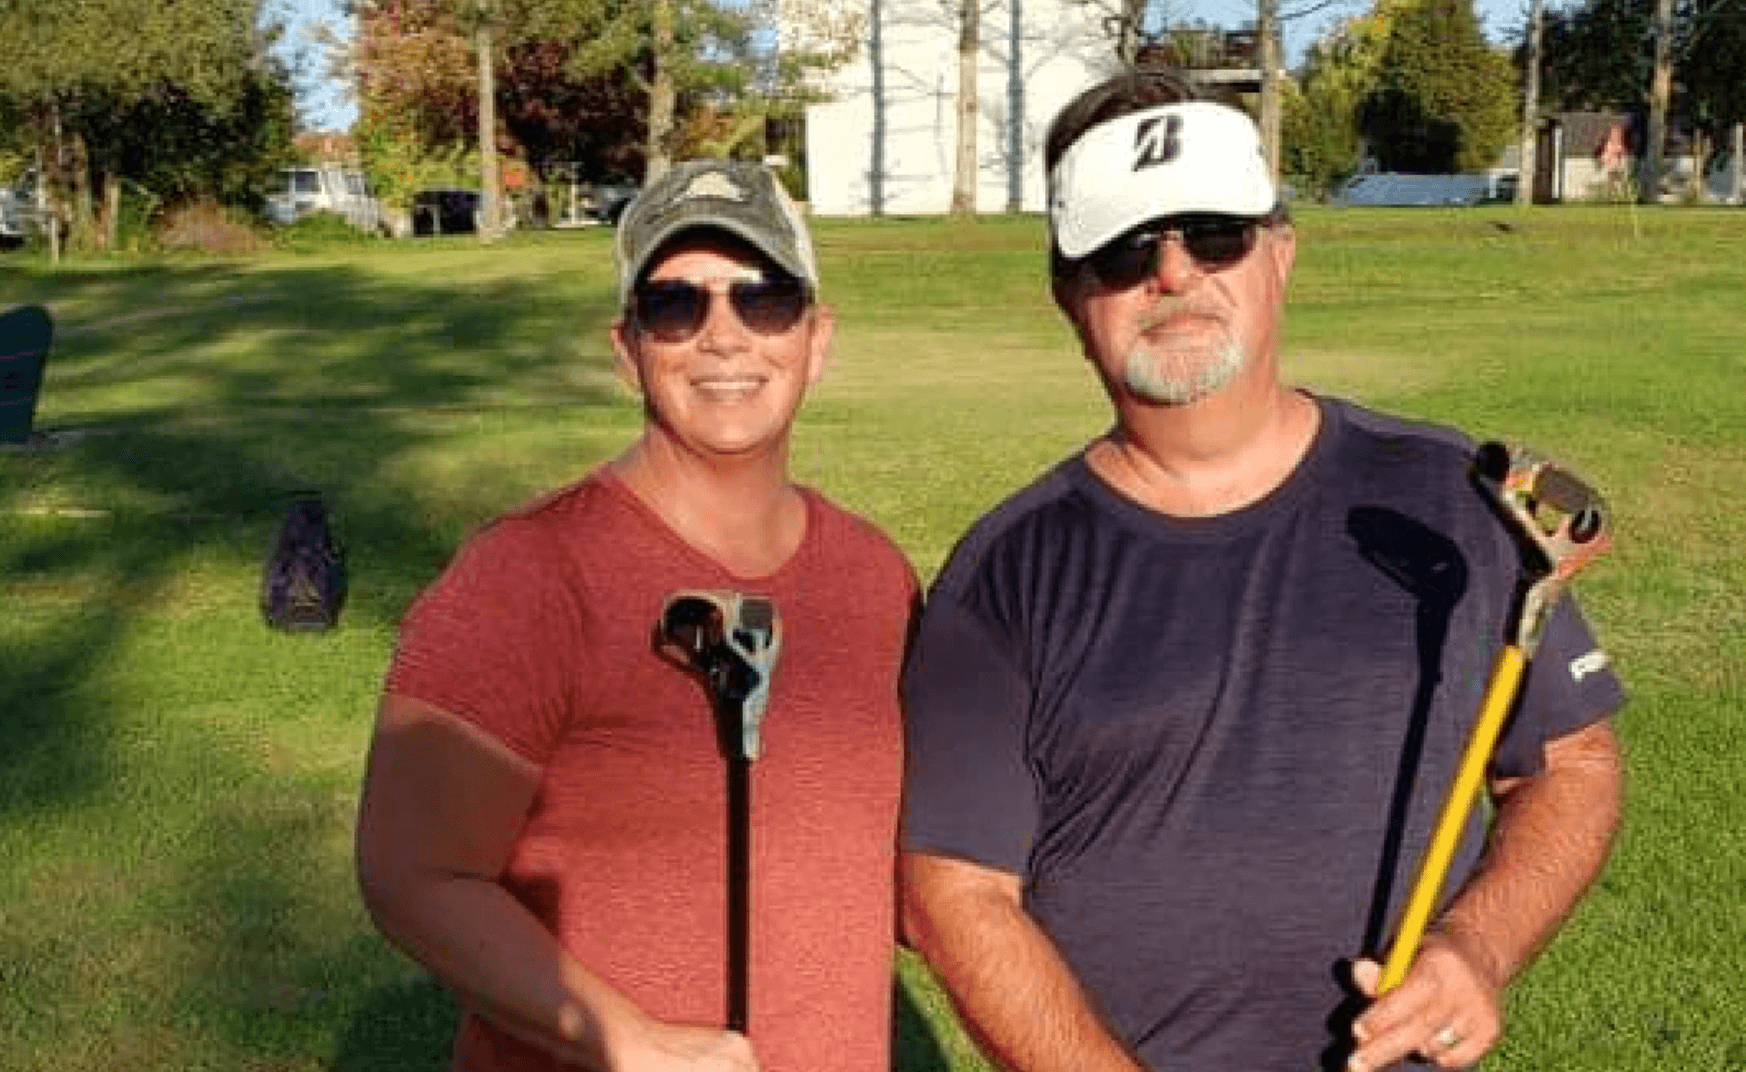 Converting to FlingGolf, Competing and Enjoying the Course Together.